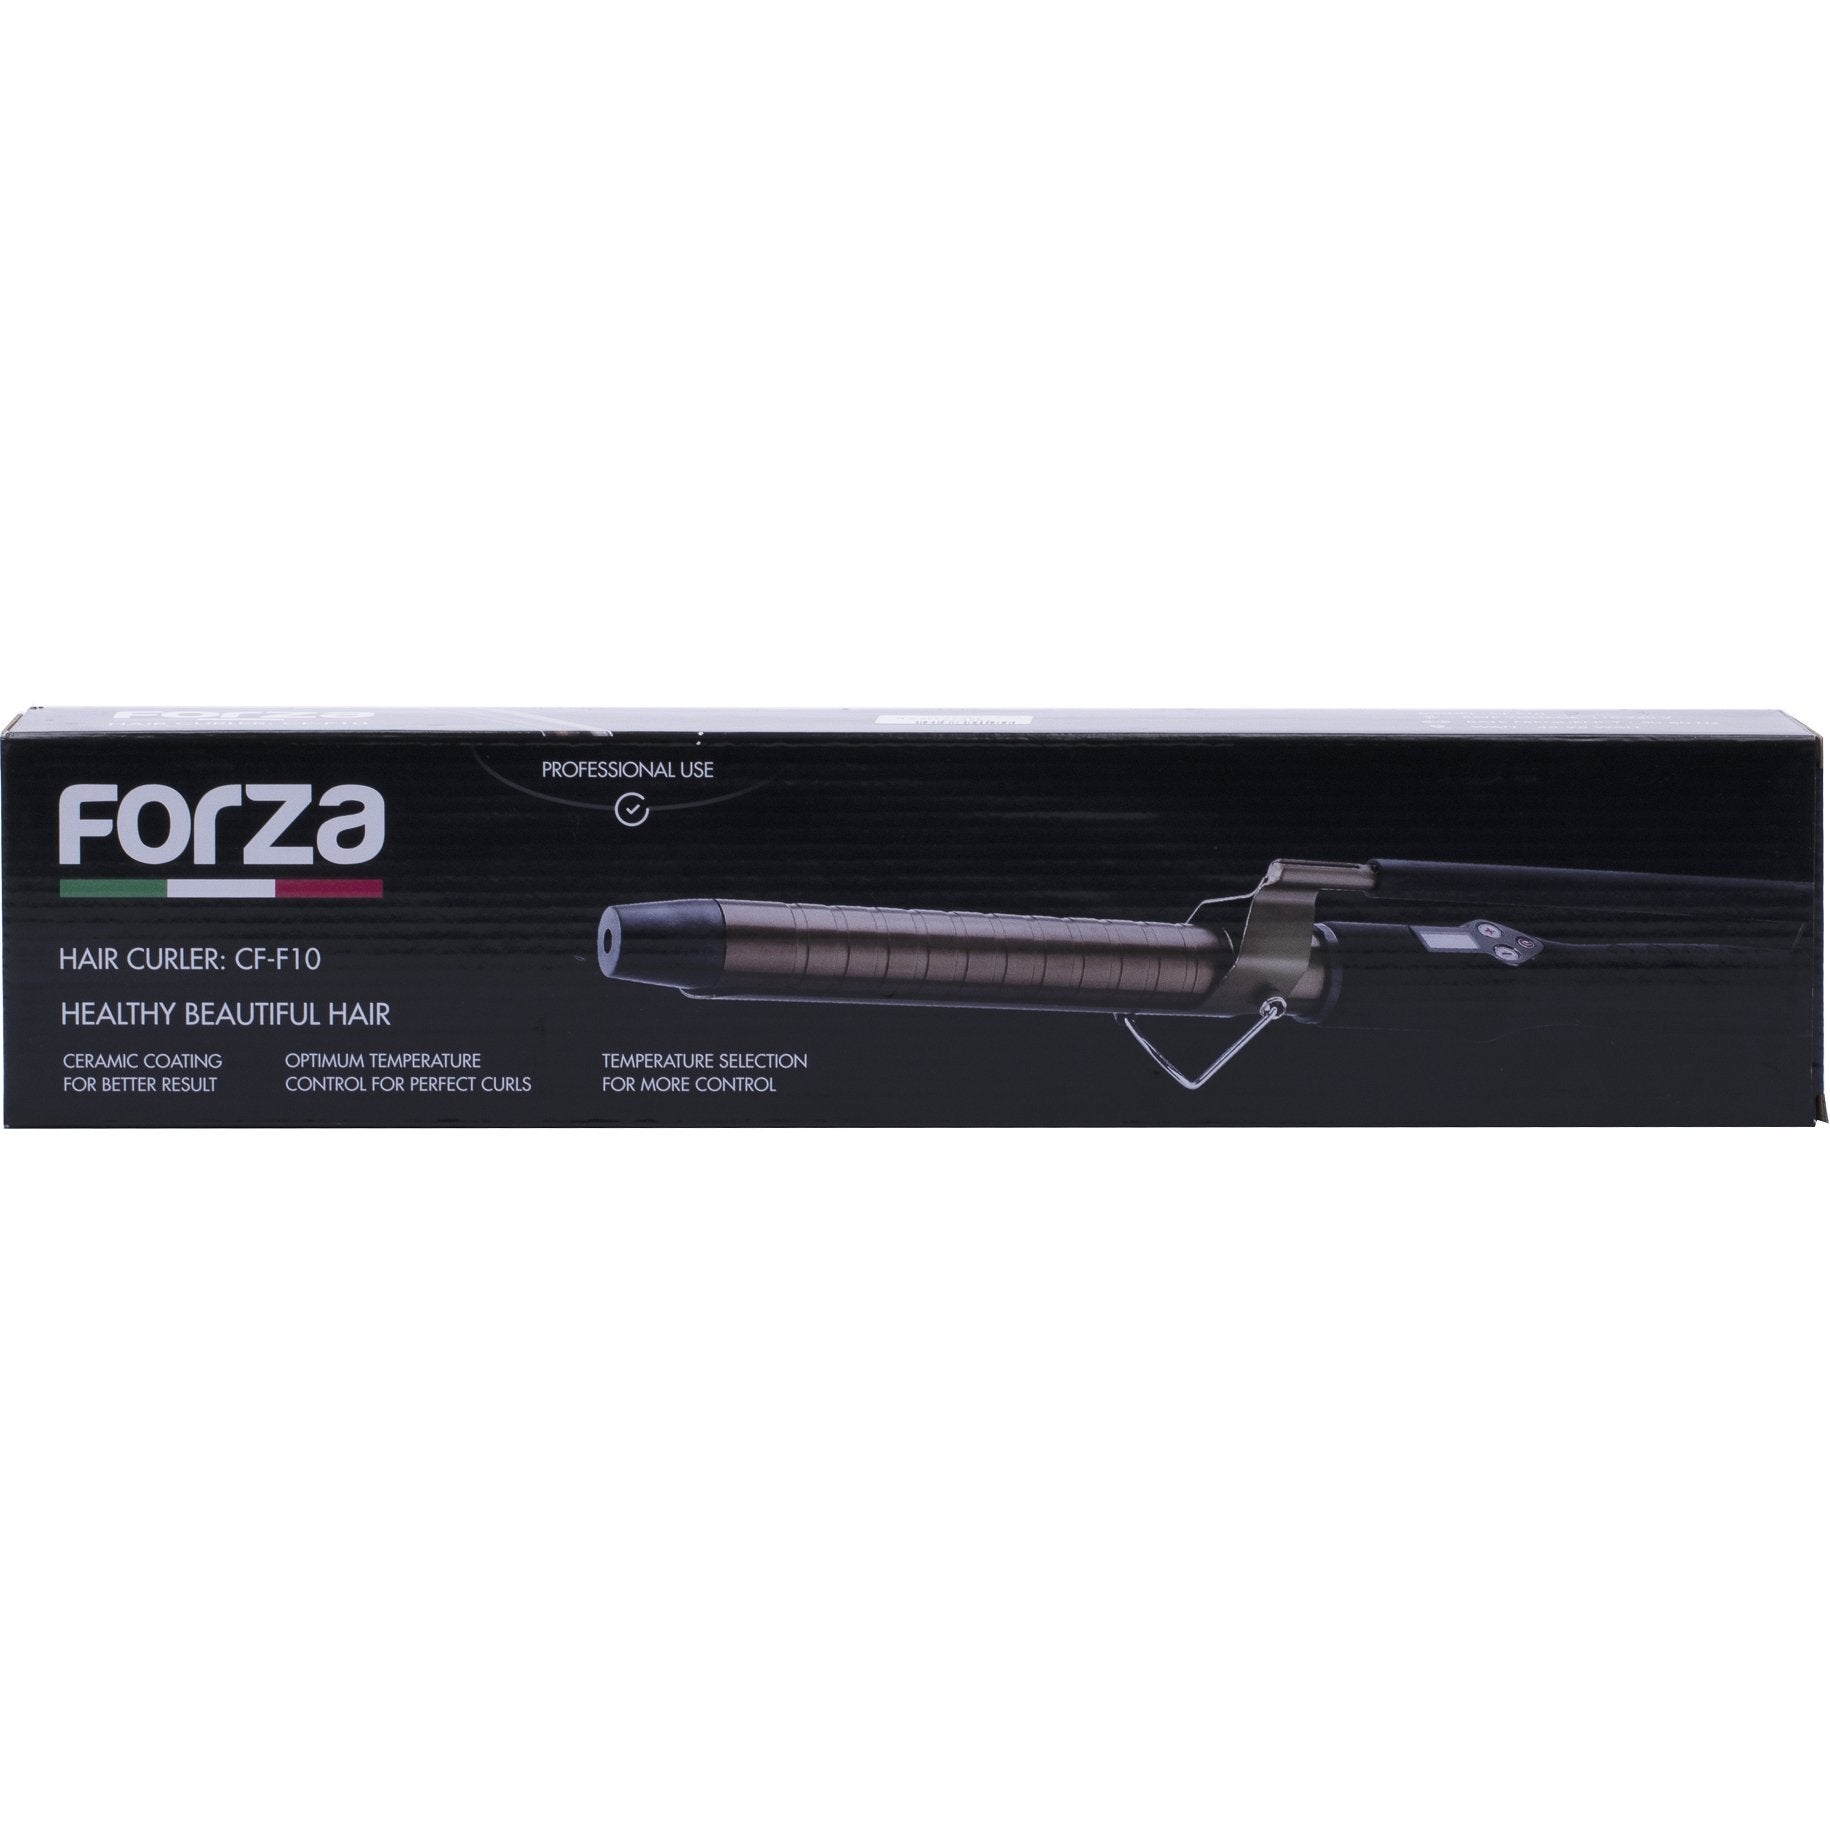 FORZA HAIR CURLER CF-F10 PROFESSIONAL USE 19 MM - IZZAT DAOUK SA